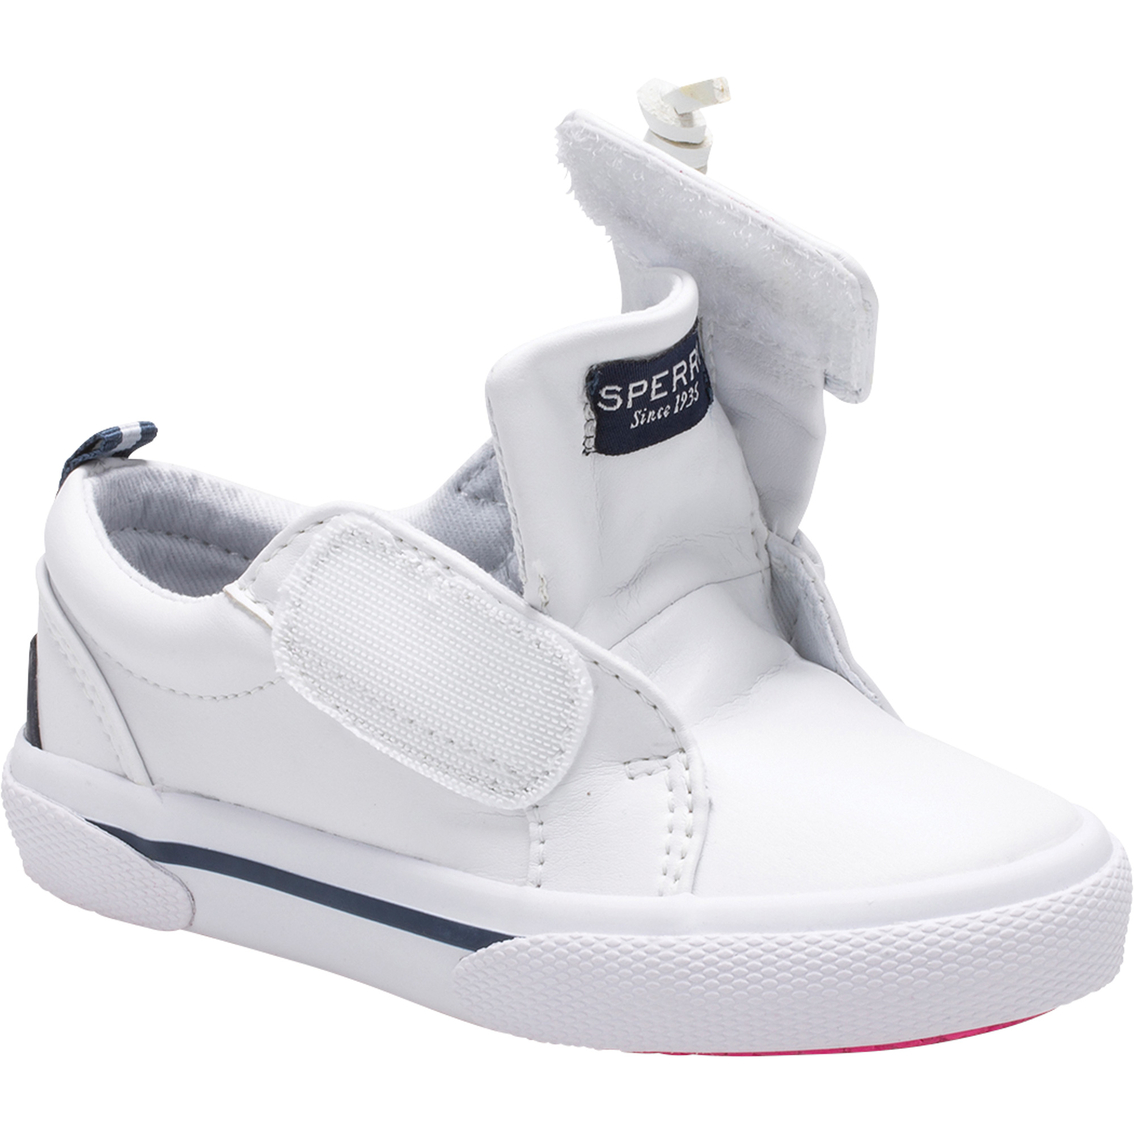 Sperry Toddler Girls Pier Wave Jr. Sneakers - Image 5 of 5